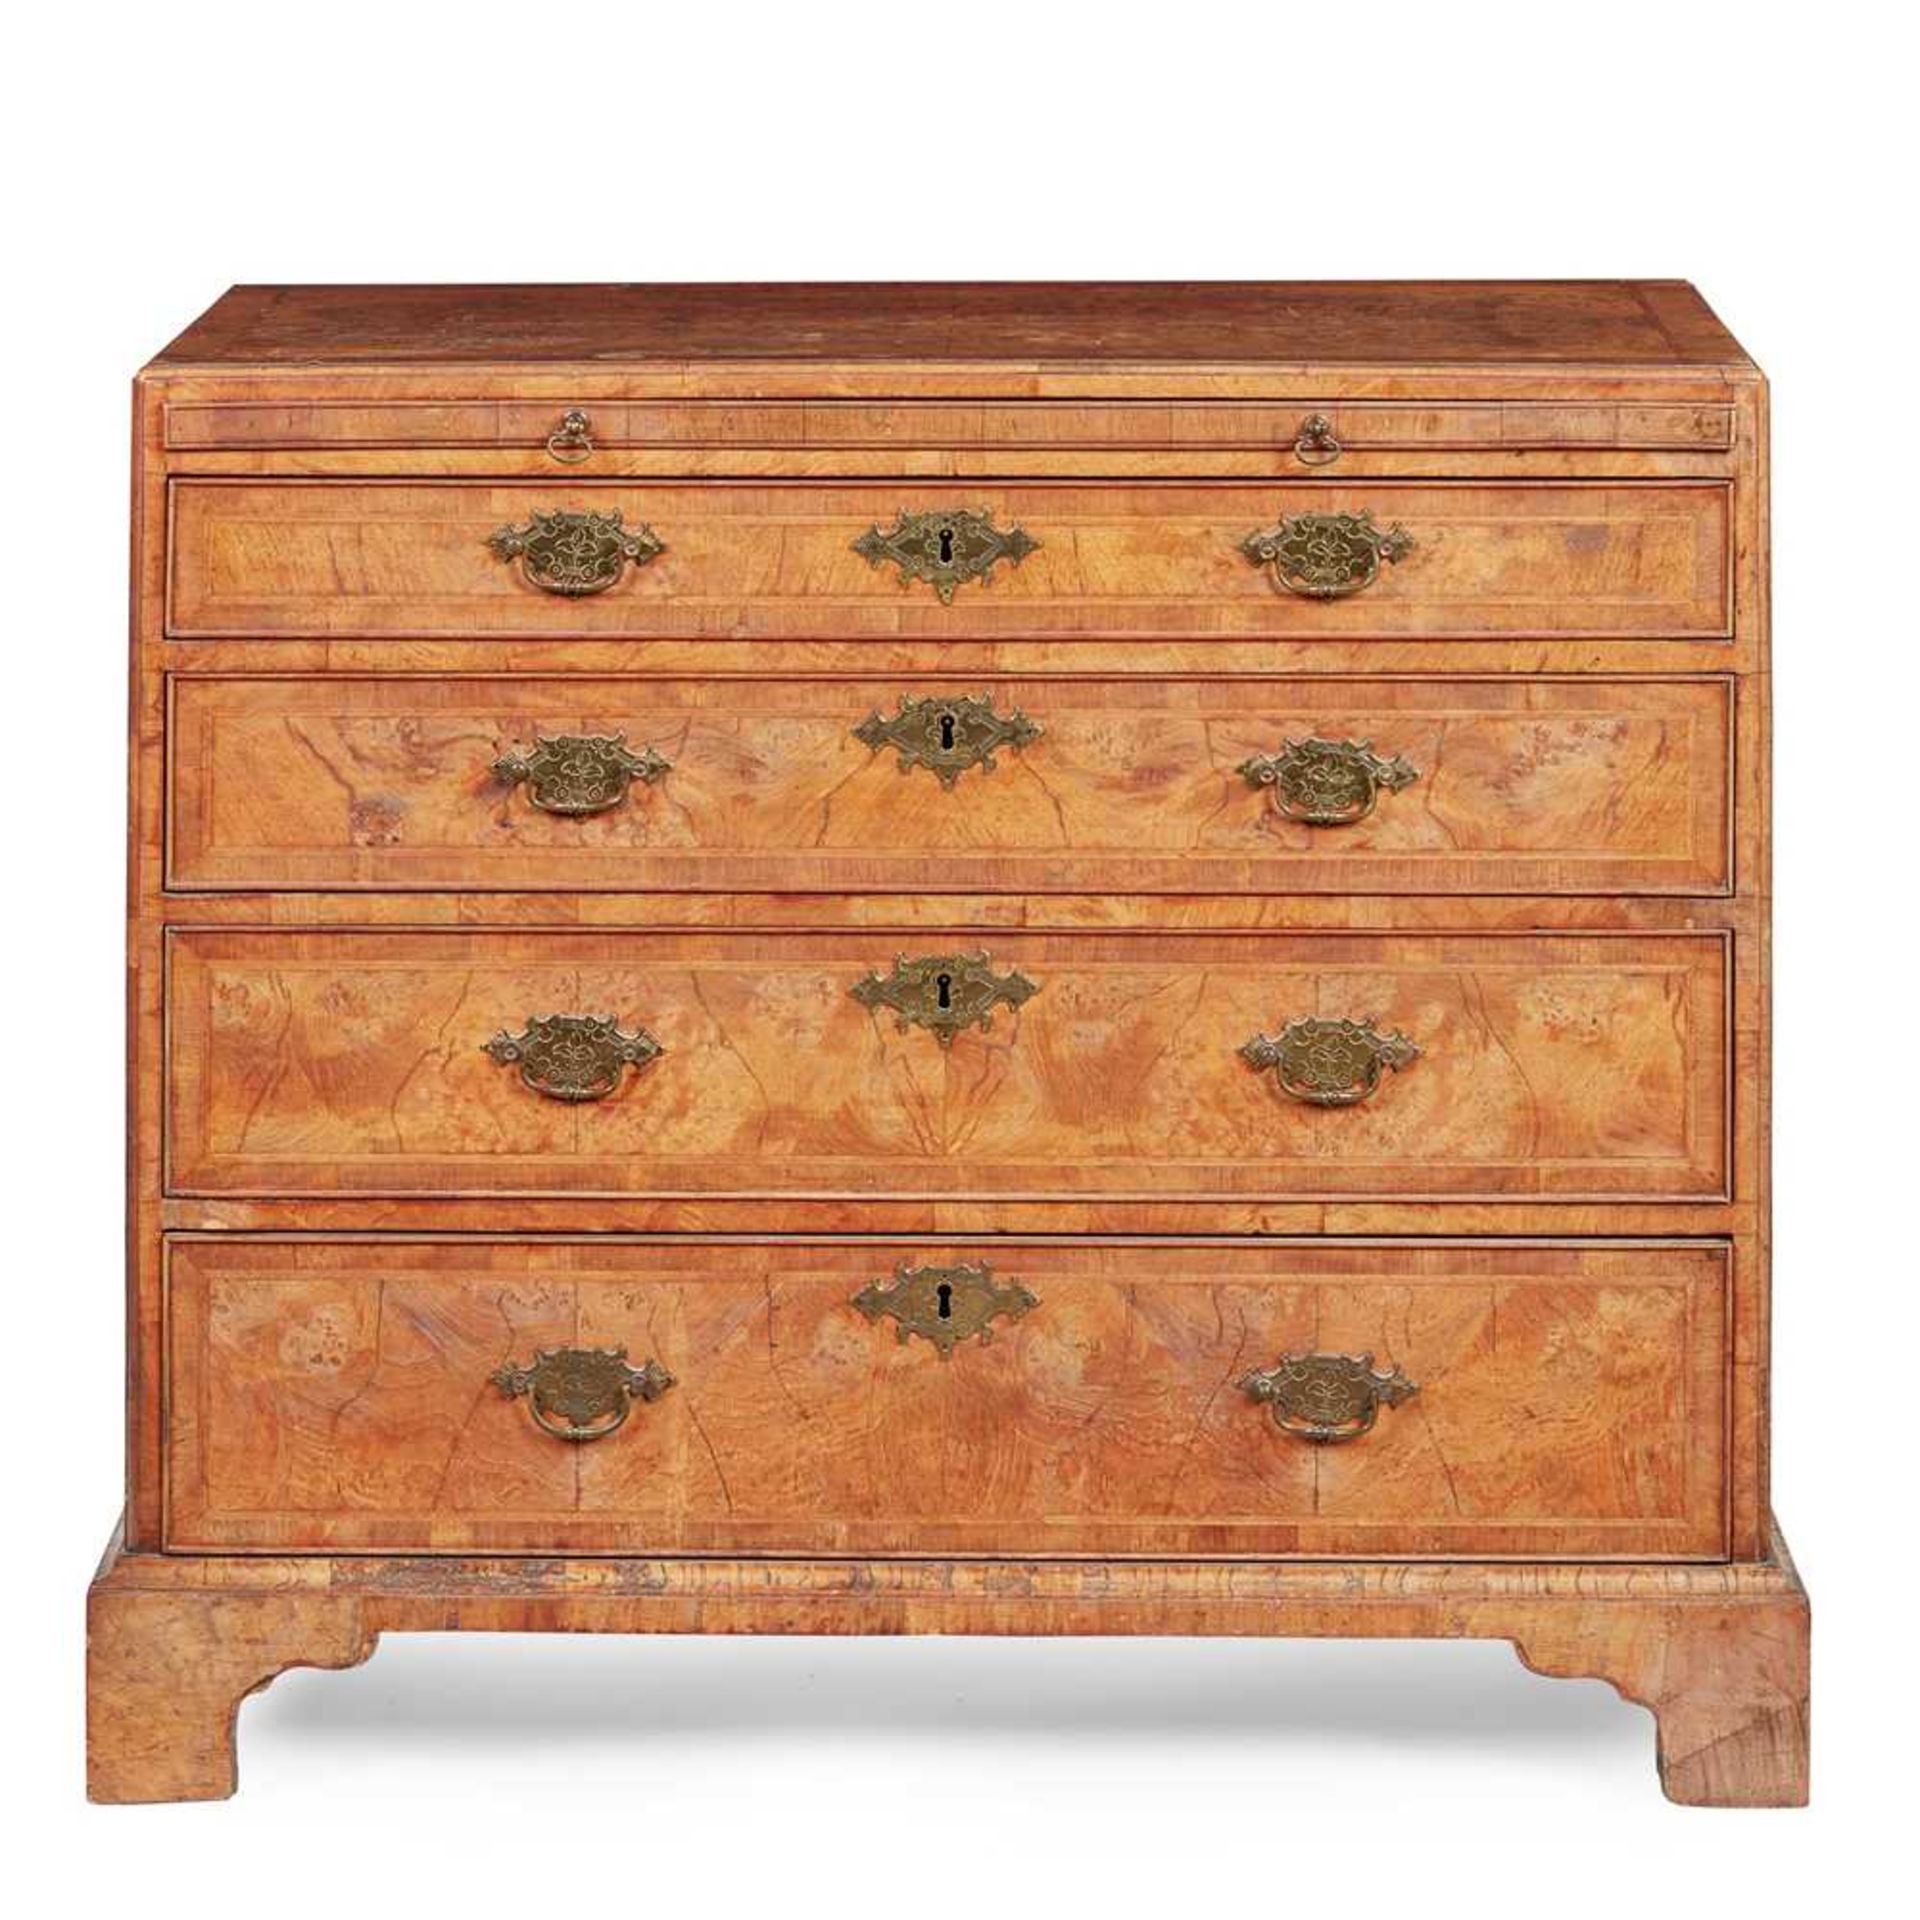 GEORGE I WALNUT CHEST OF DRAWERS EARLY 18TH CENTURY, WITH ALTERATIONS